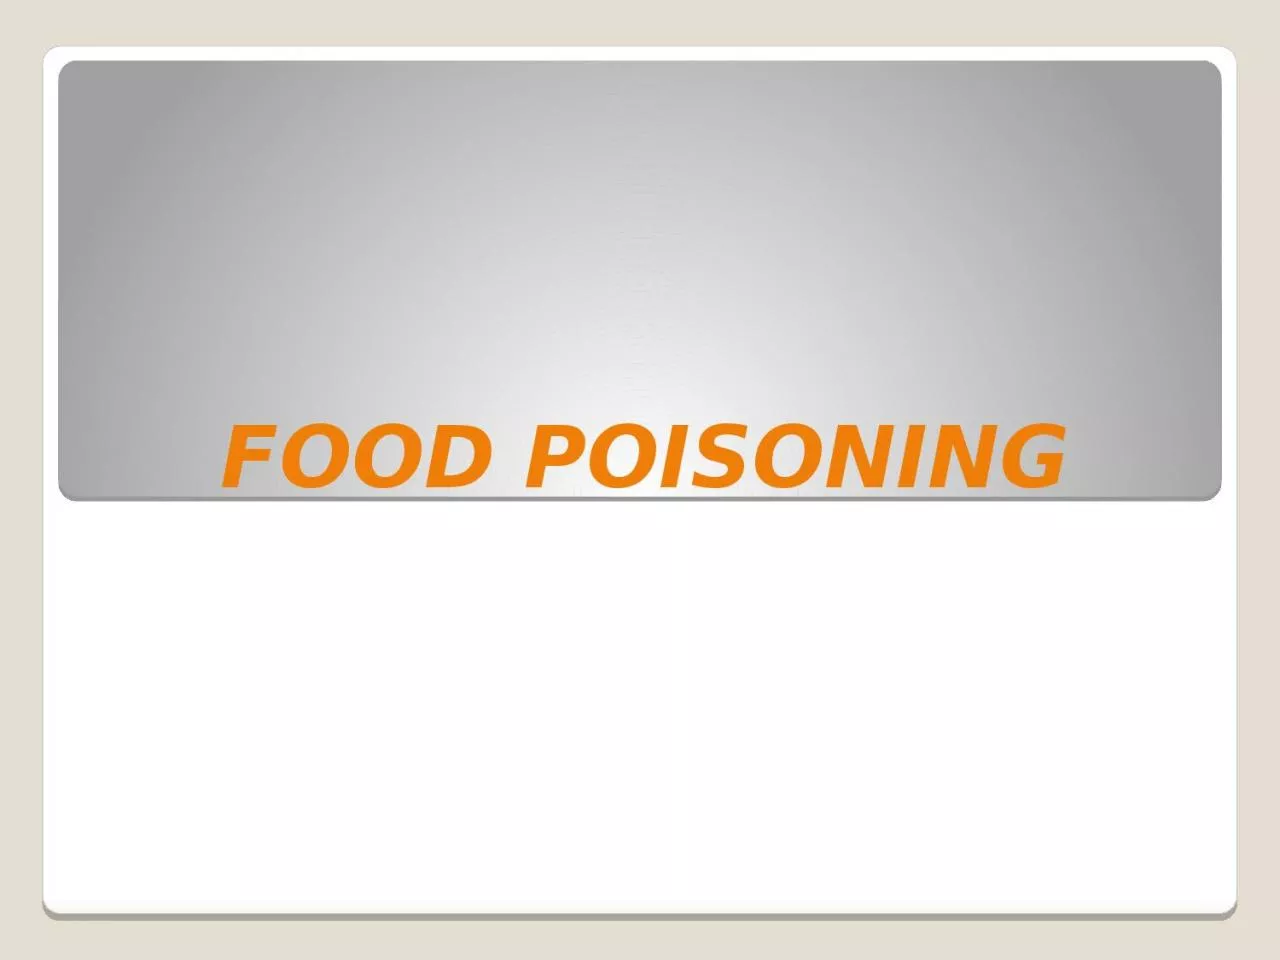 FOOD POISONING INTRODUCTION